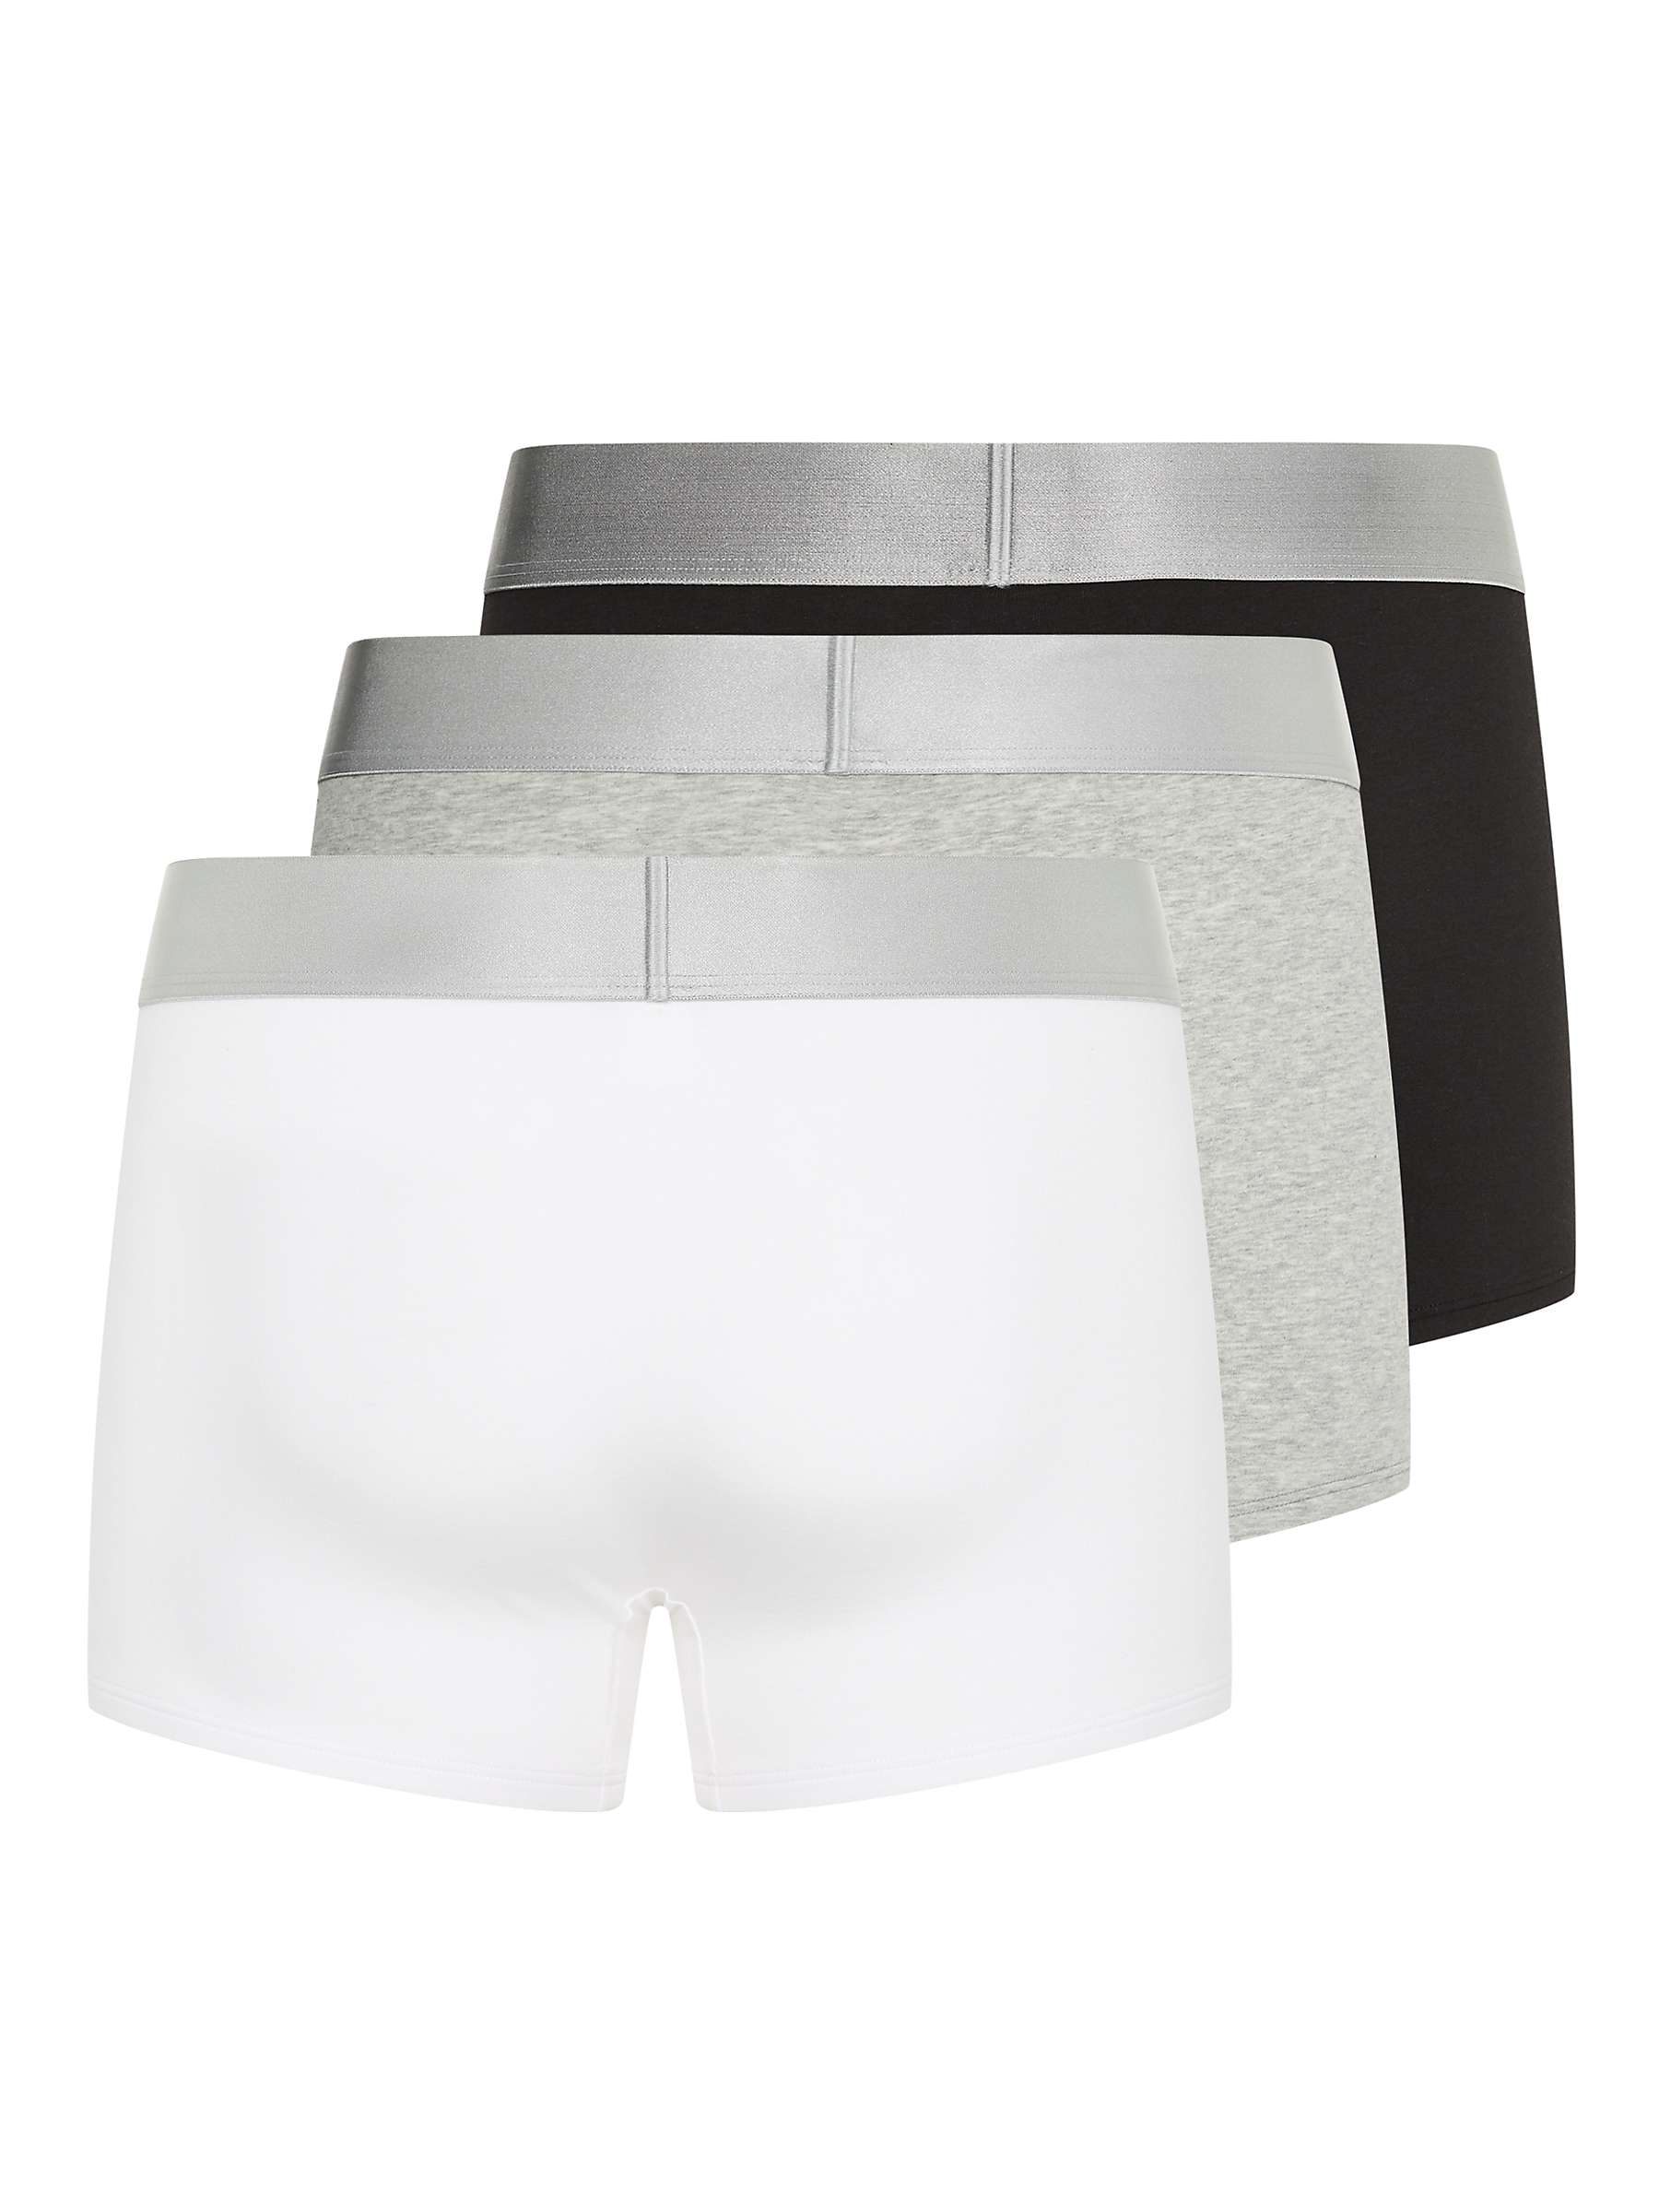 Buy Calvin Klein Recycled Cotton Blend Trunks, Pack of 3 Online at johnlewis.com